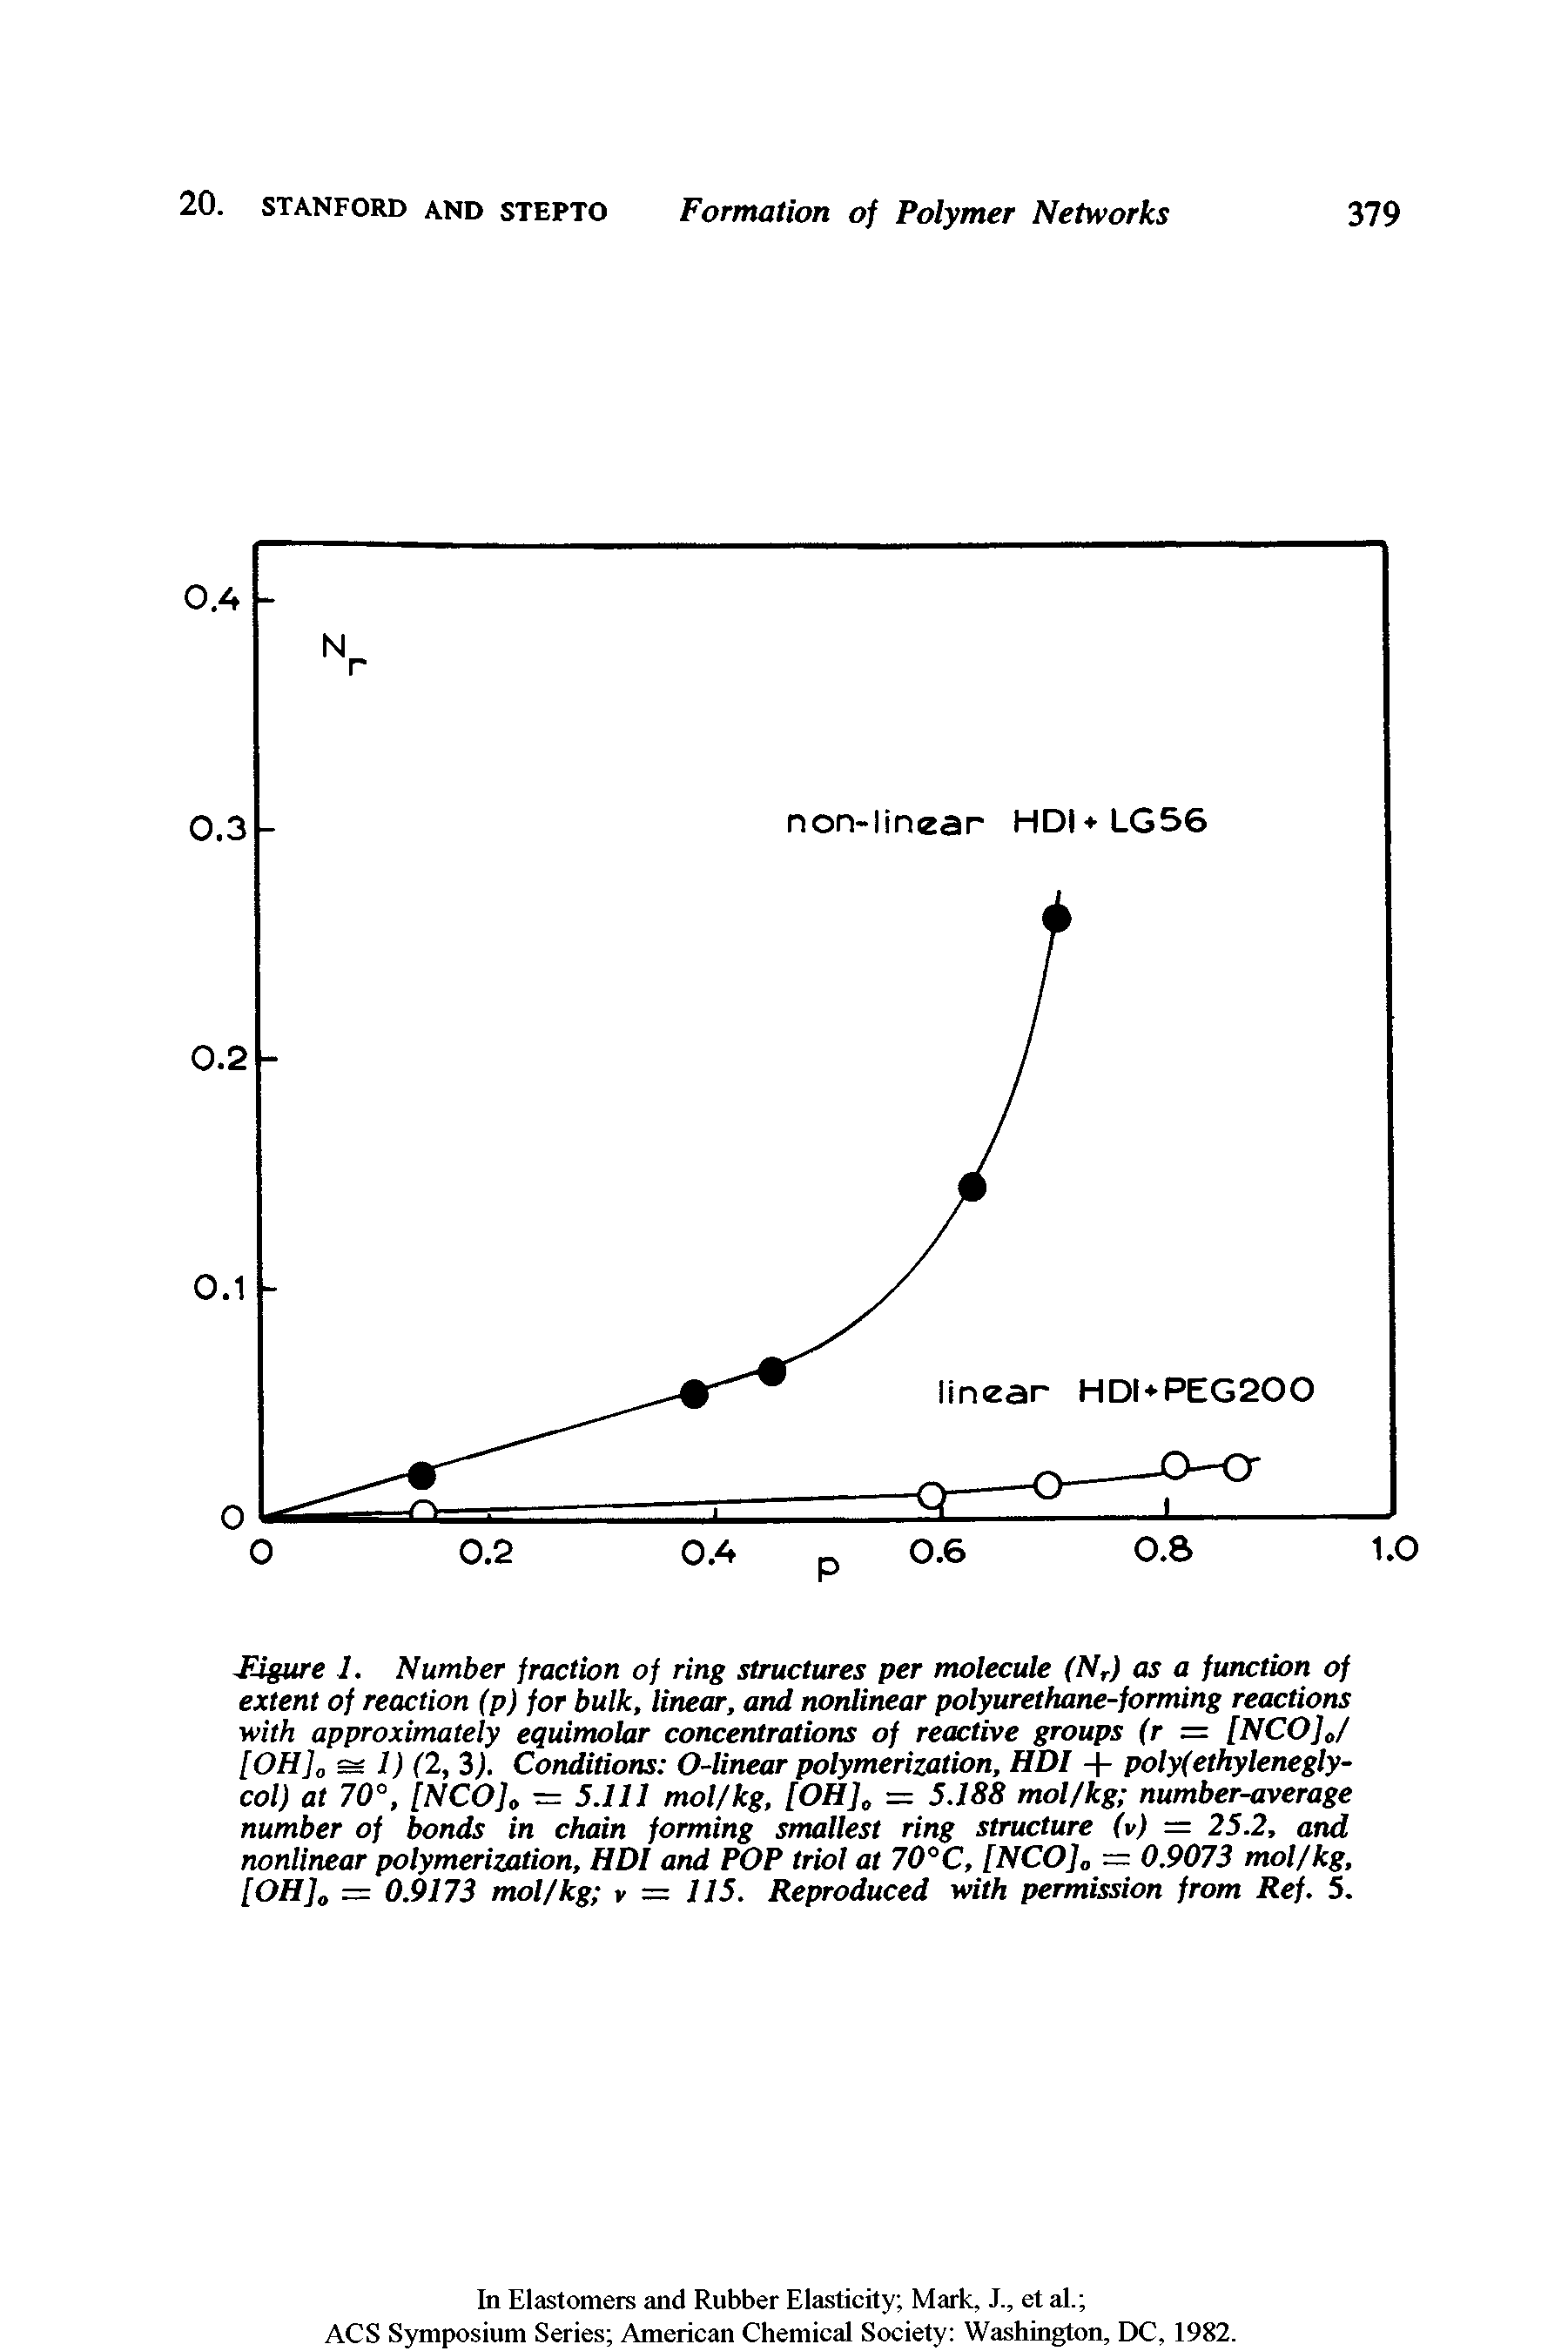 Figure 1. Number fraction of ring structures per molecule (Nr) as a function of extent of reaction (p) for bulk, linear, and nonlinear polyurethane-forming reactions with approximately equimolar concentrations of reactive groups (r = [NCO]J [OH]0 ss 1) (2,3). Conditions O-linear polymerization, HDI + poly(ethyleneglycol) at 70°, [NCOfo — 5.111 mol/kg, [OH], = 5.188 mol/kg number-average number of bonds in chain forming smallest ring structure (v) = 25.2, and nonlinear polymerization, HDI and POP triol at 70°C, [NCO] — 0.9073 mol/kg, [OH]0 = 0.9173 mol/kg v = 115. Reproduced with permission from Ref. 5.